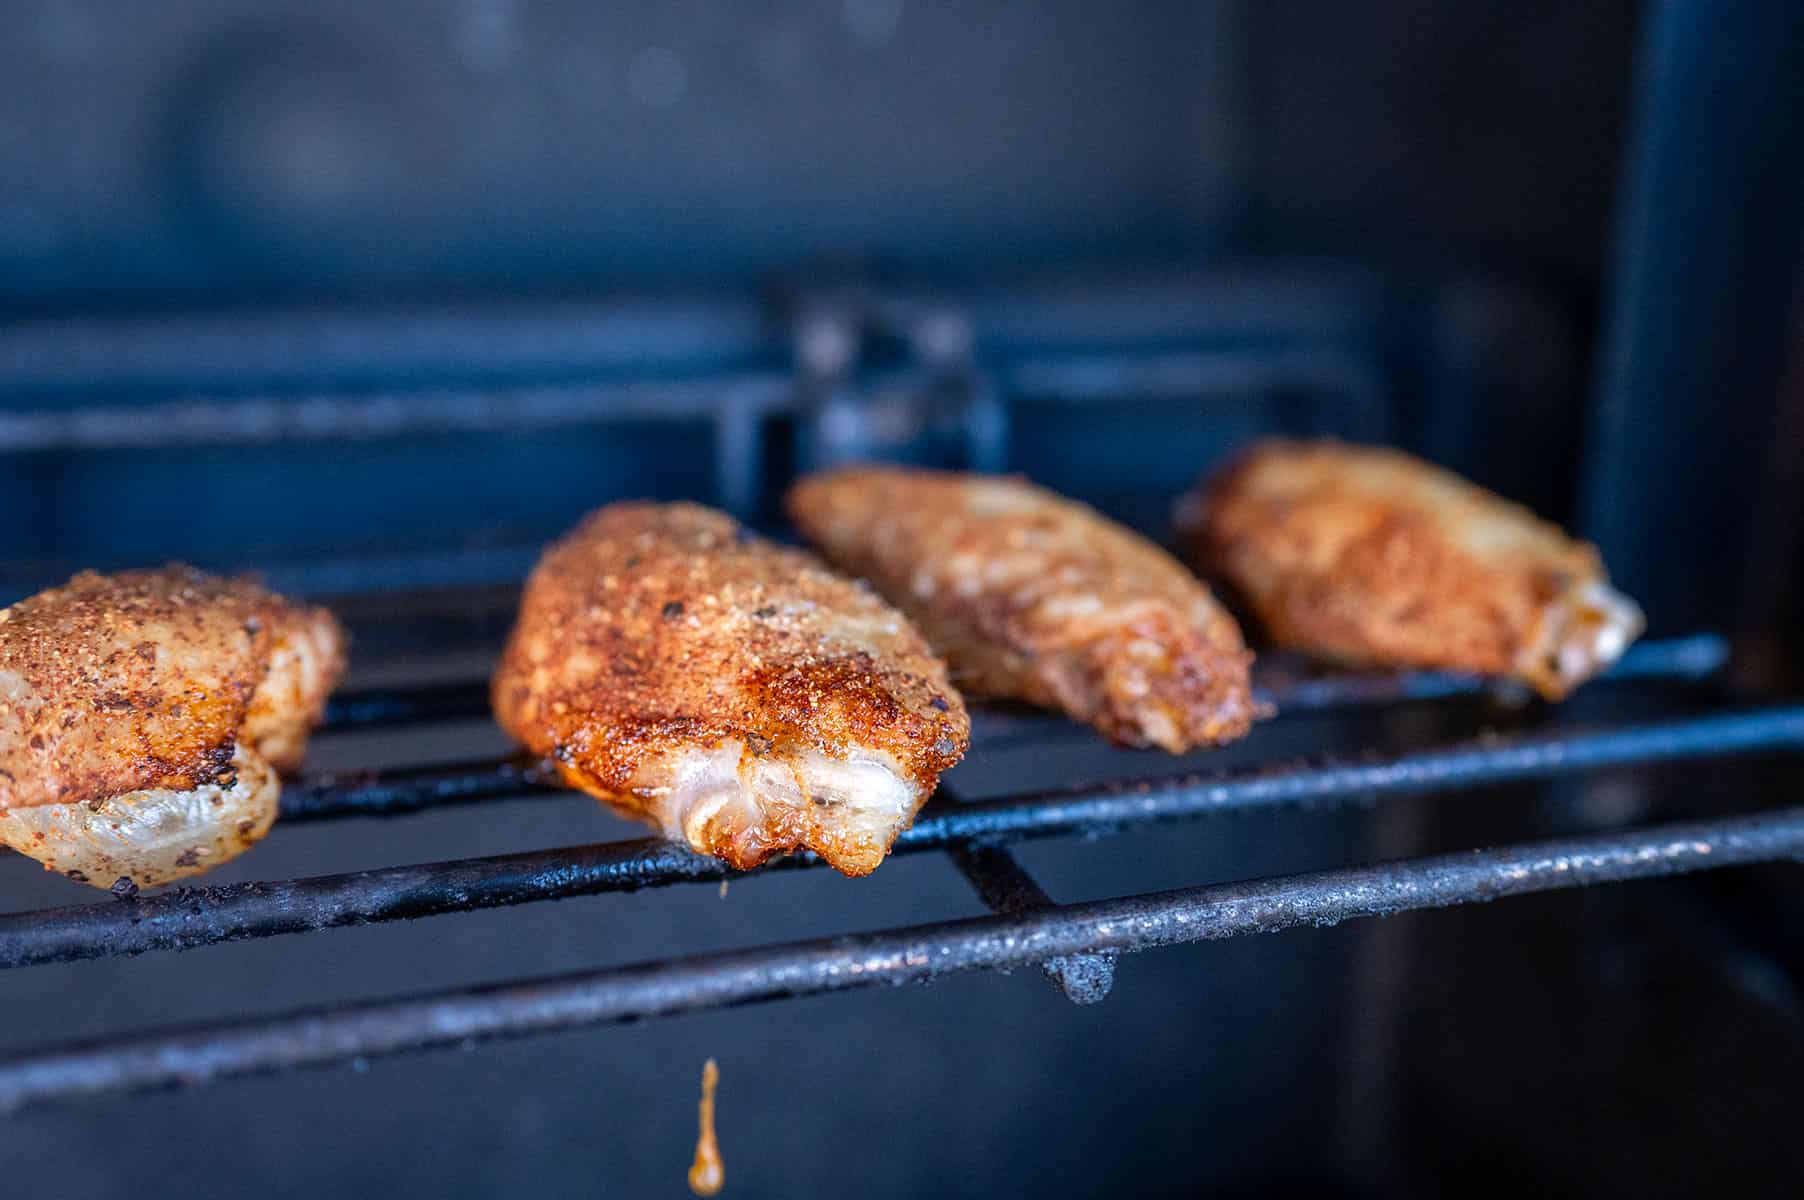 Chicken wing on gas grill.